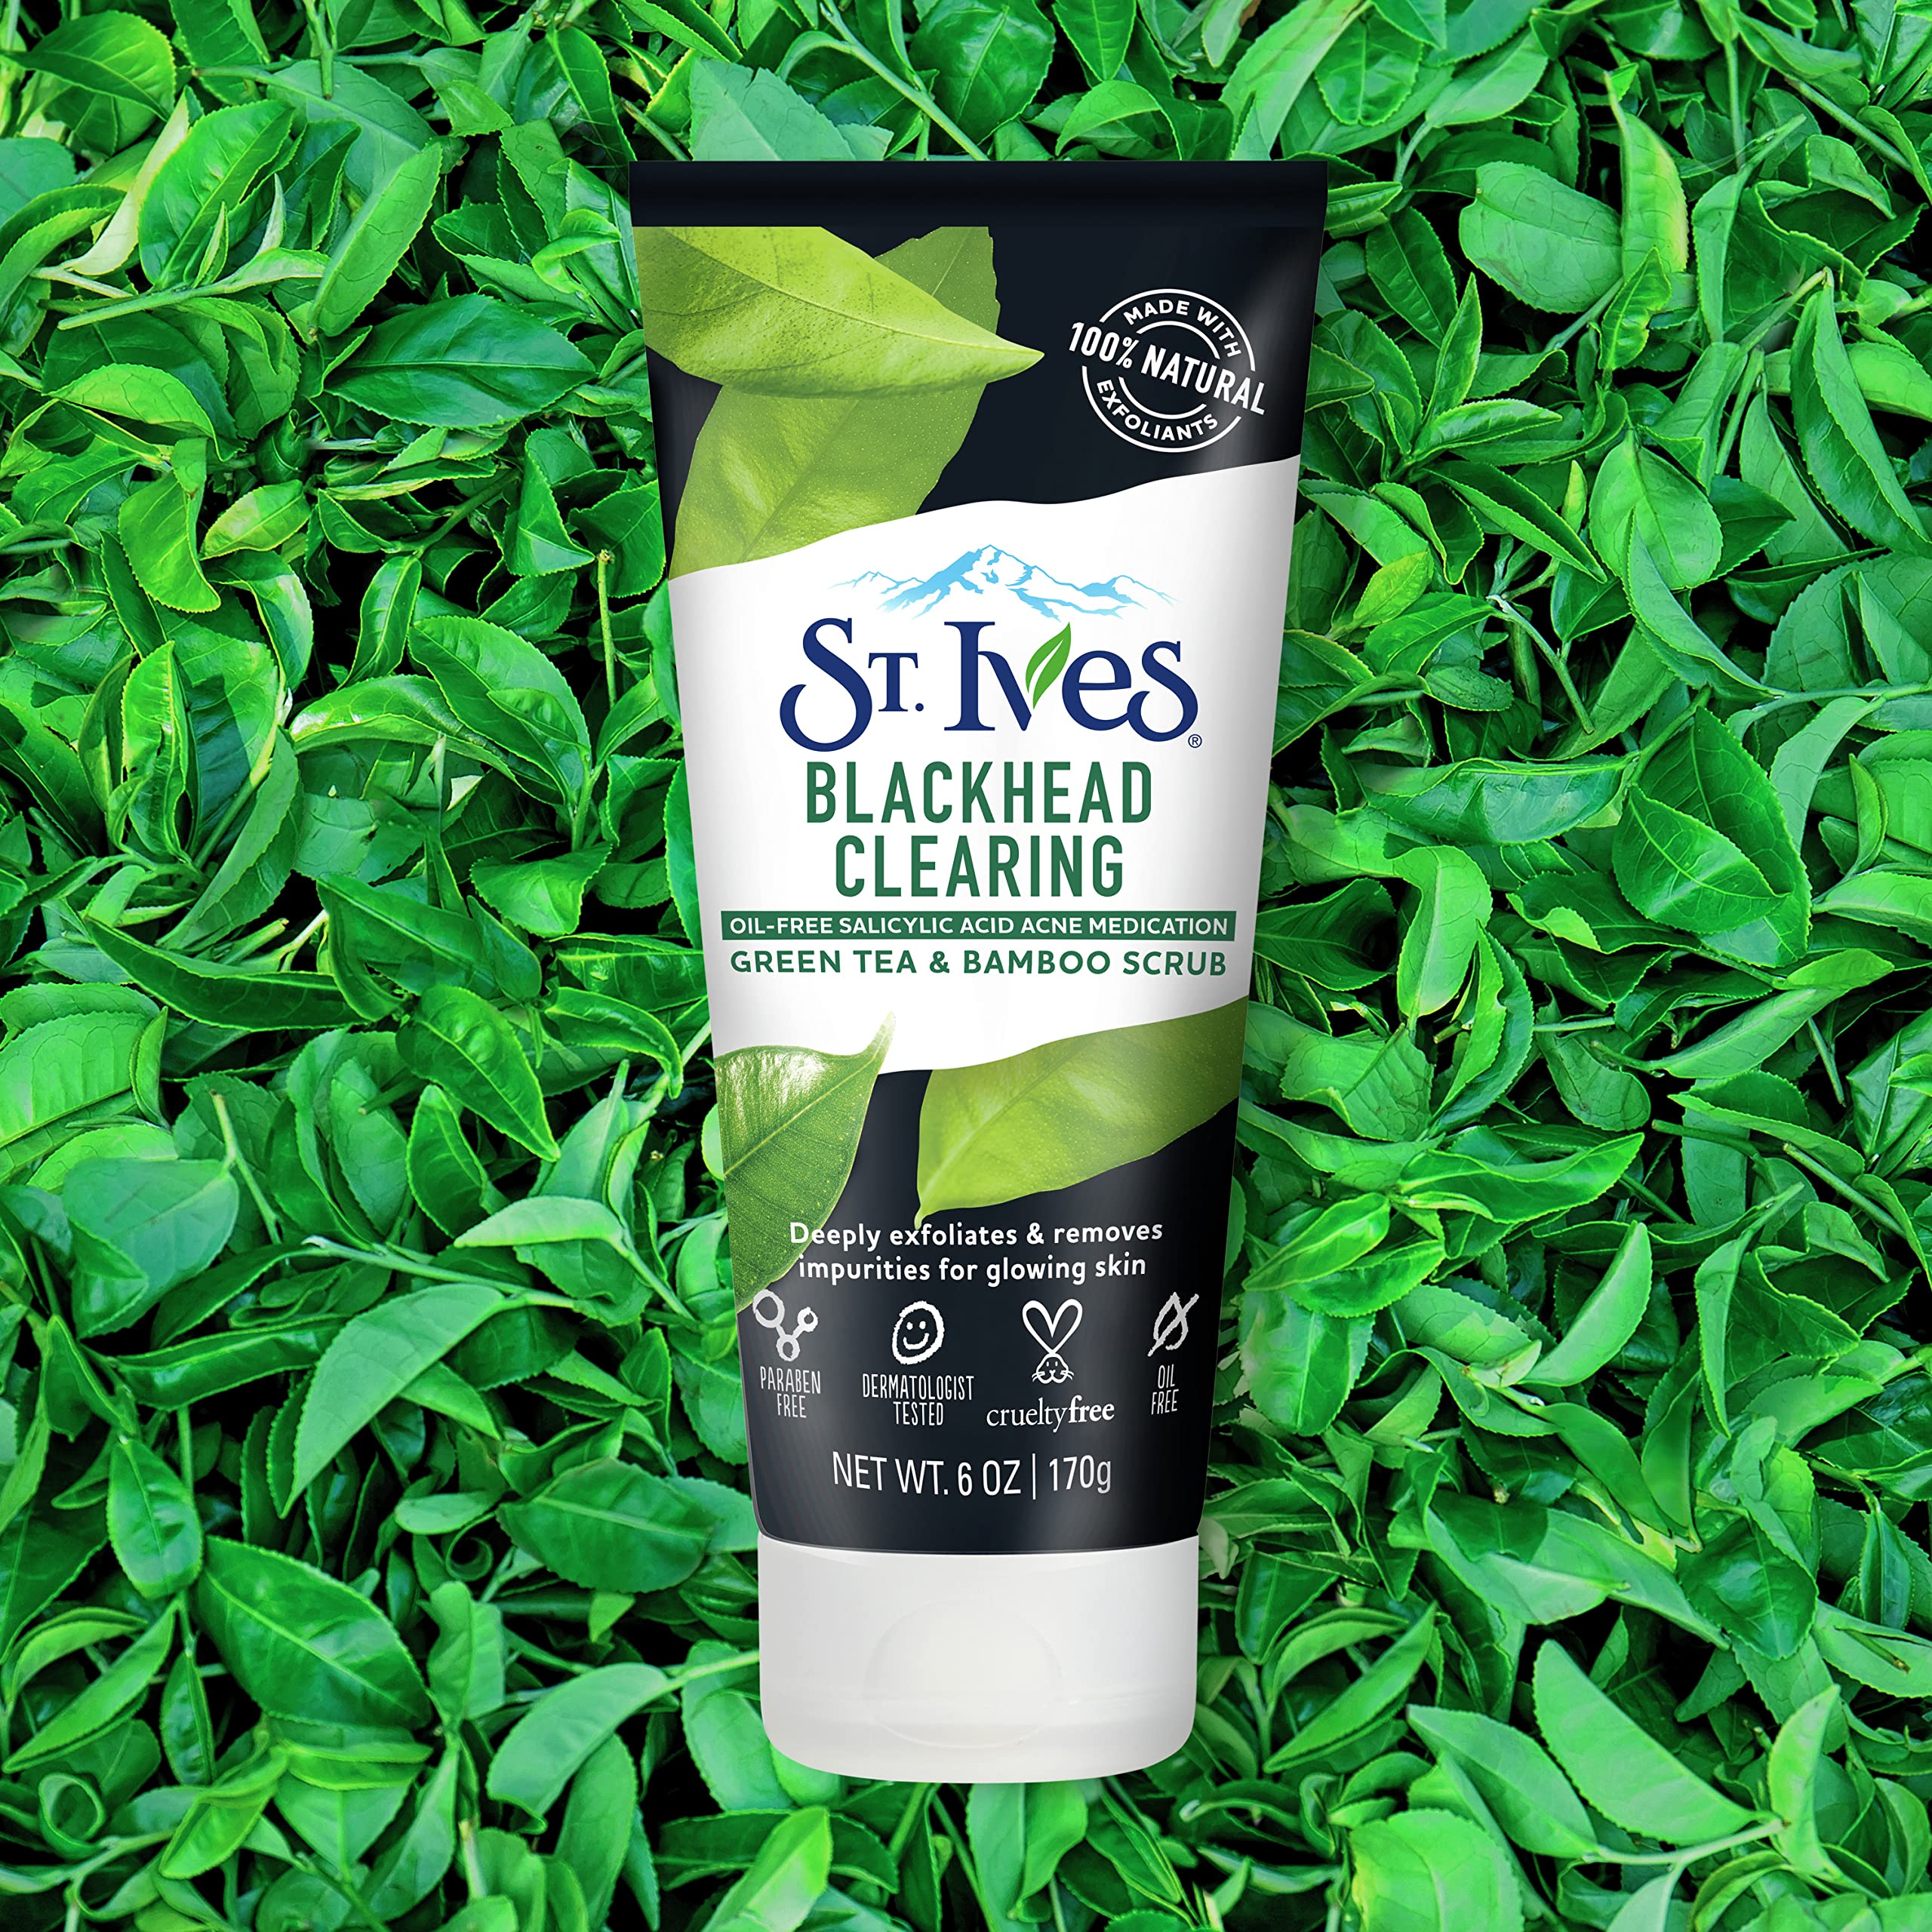 St. Ives Face Scrub Clears Blackheads and Unclogs Pores Green Tea and Bamboo With Oil-Free Salicylic Acid Acne Medication, Made with 100 percent Natural Exfoliants, 6 Ounce (Pack of 6)